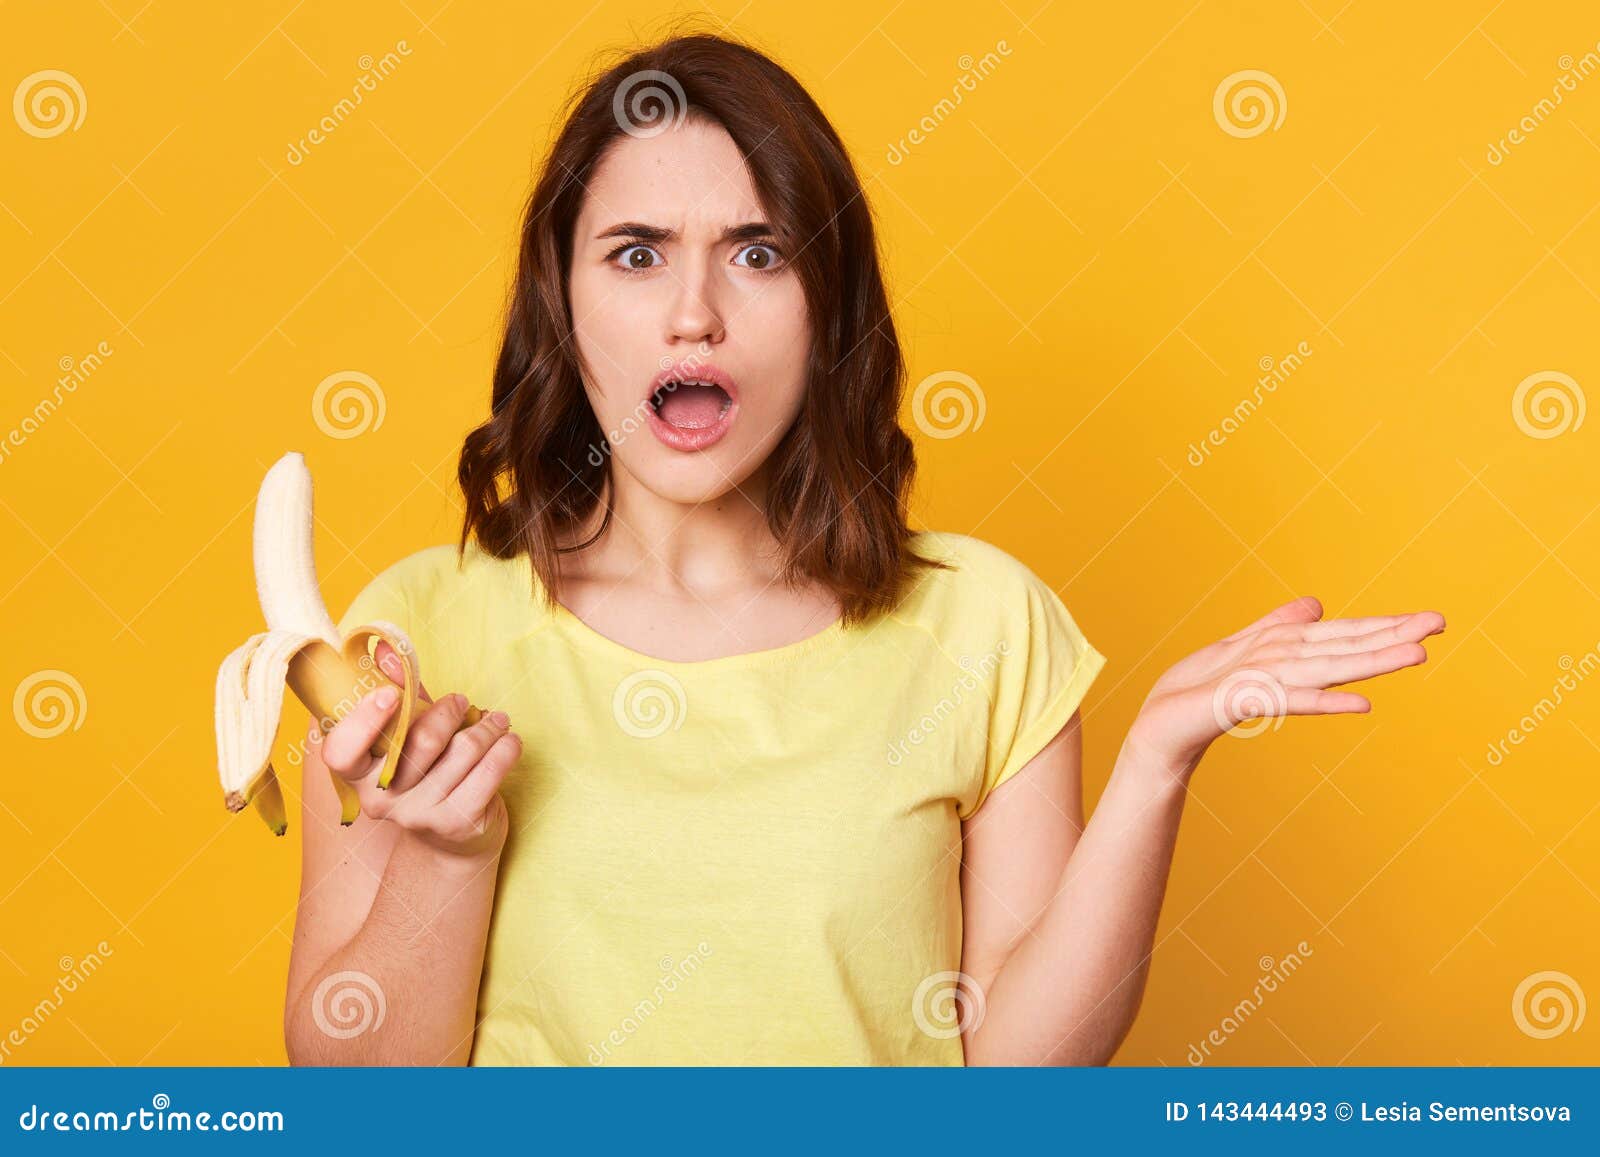 beautiful young woman holding fresh banana, takes hands to side, has uncomprehending facial expresion, standing with open mouth